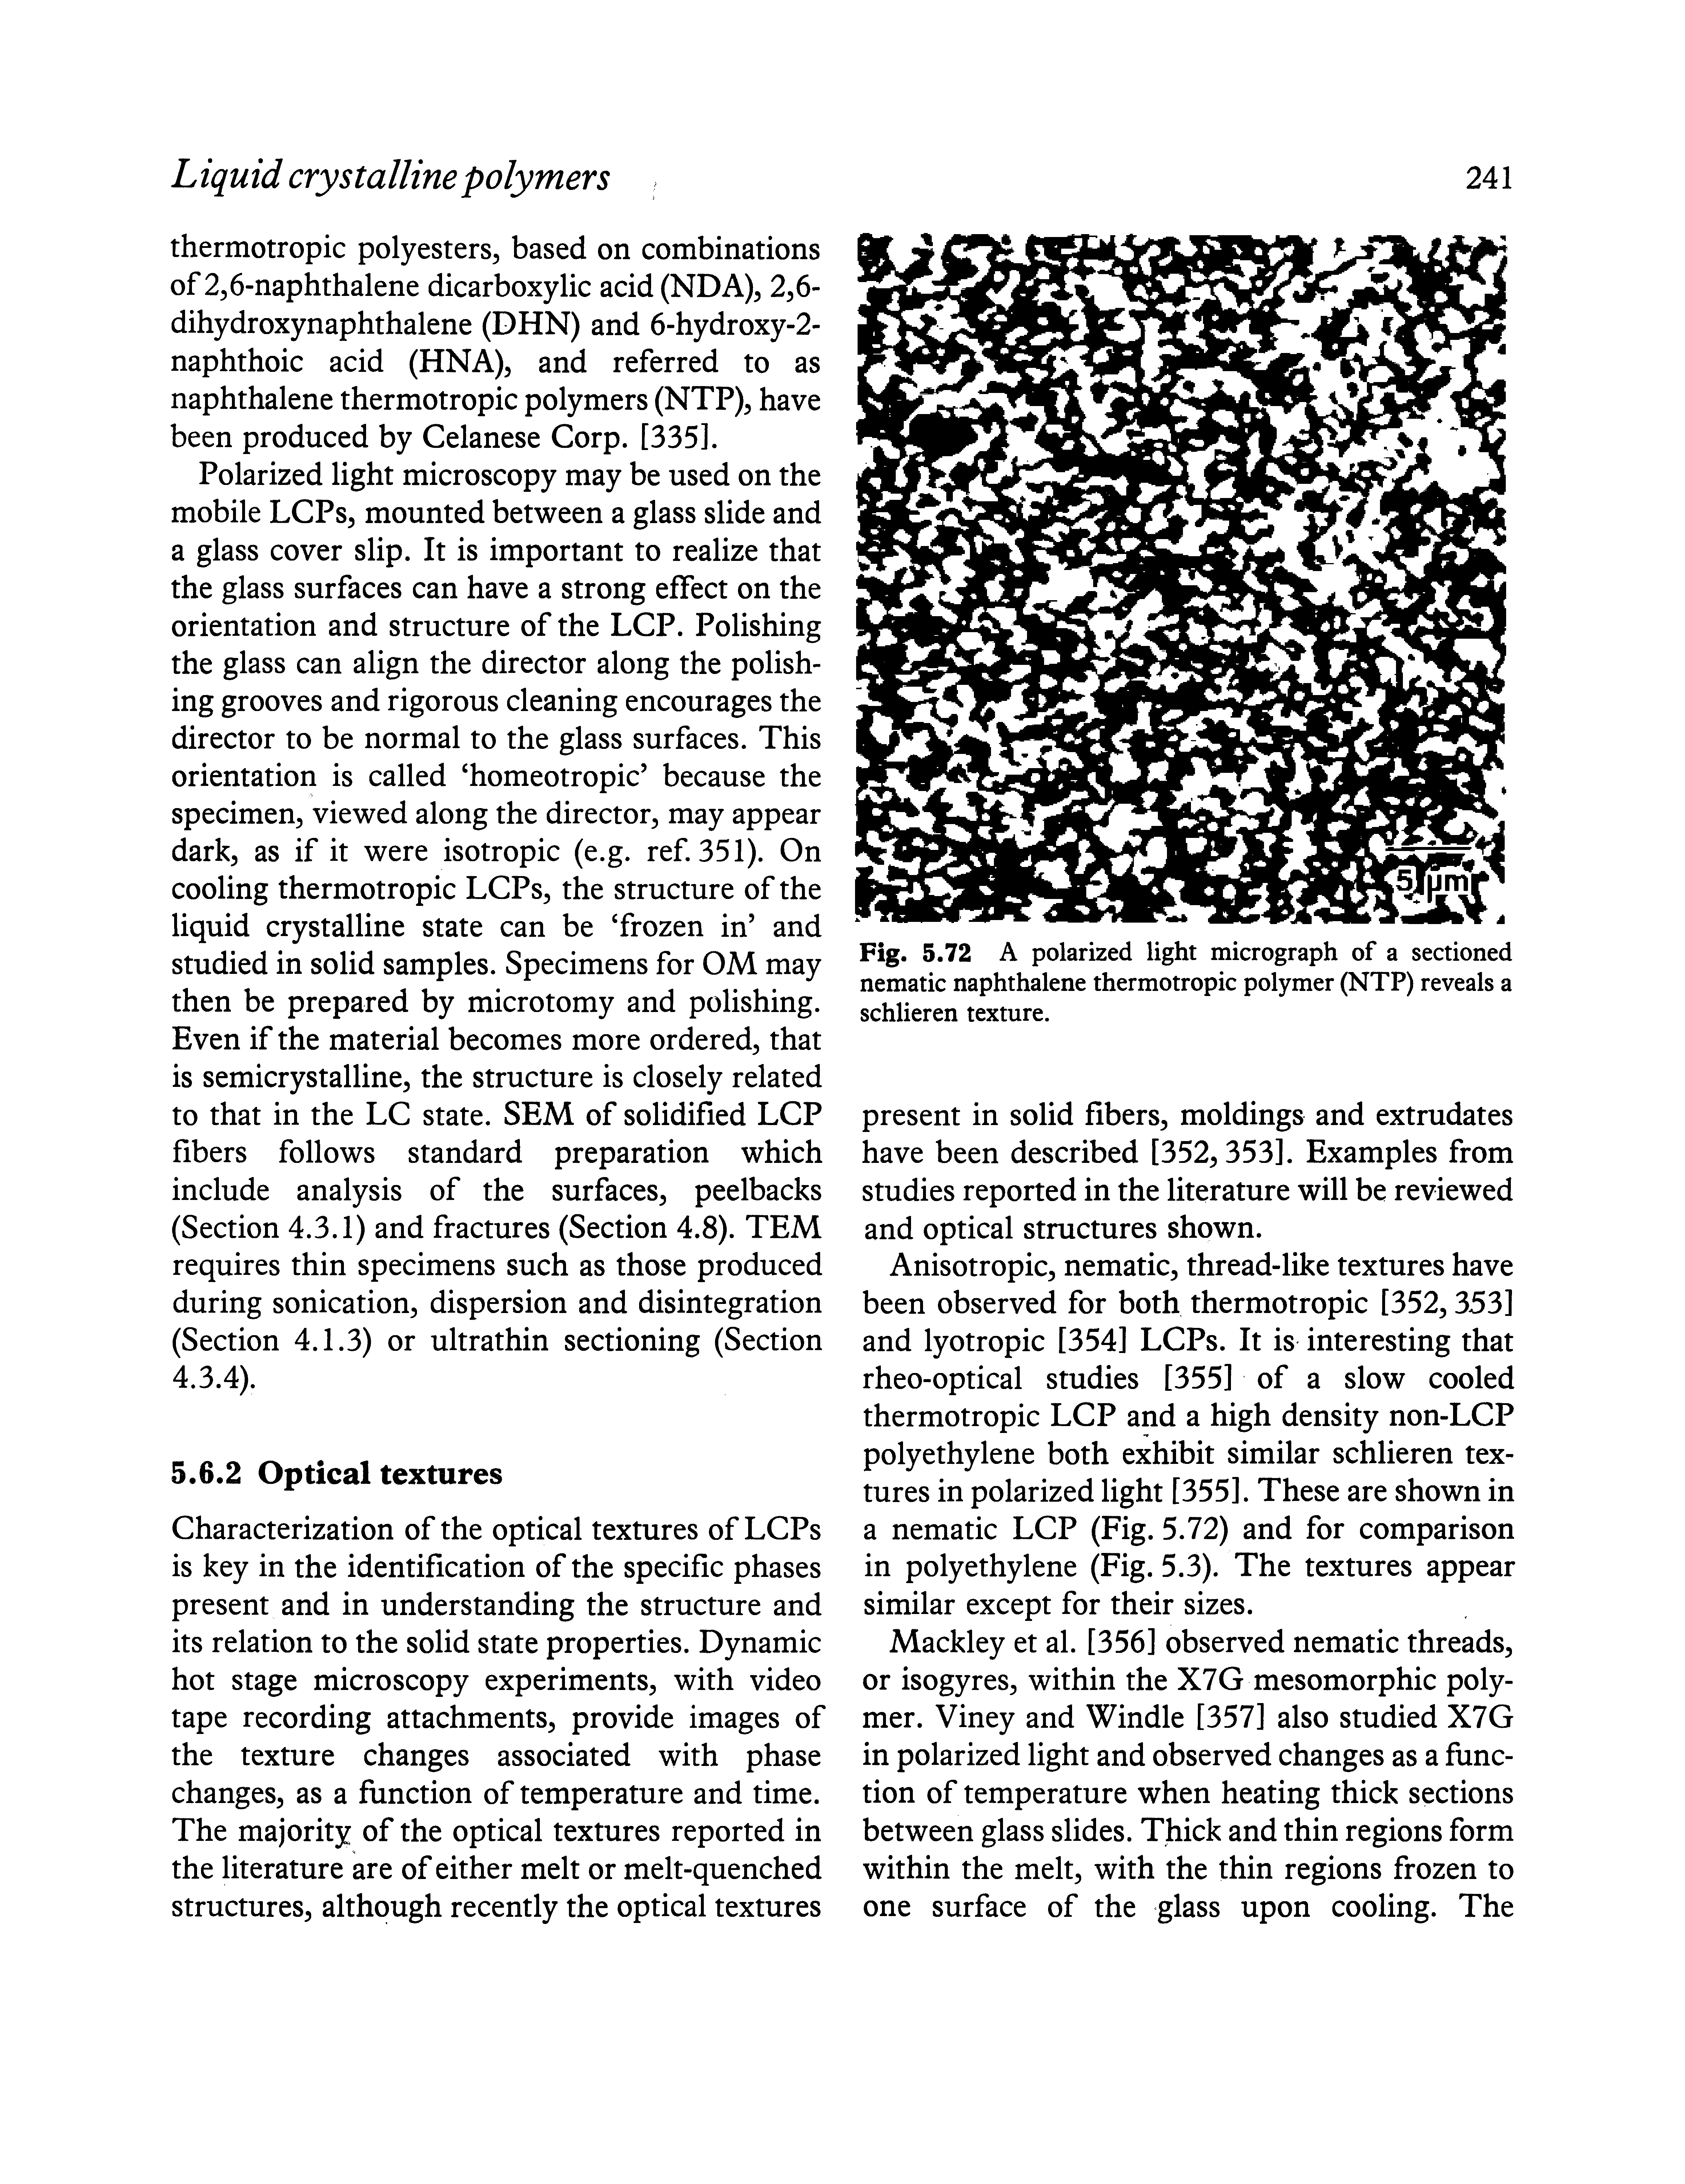 Fig. 5.72 A polarized light micrograph of a sectioned nematic naphthalene thermotropic polymer (NTP) reveals a schlieren texture.